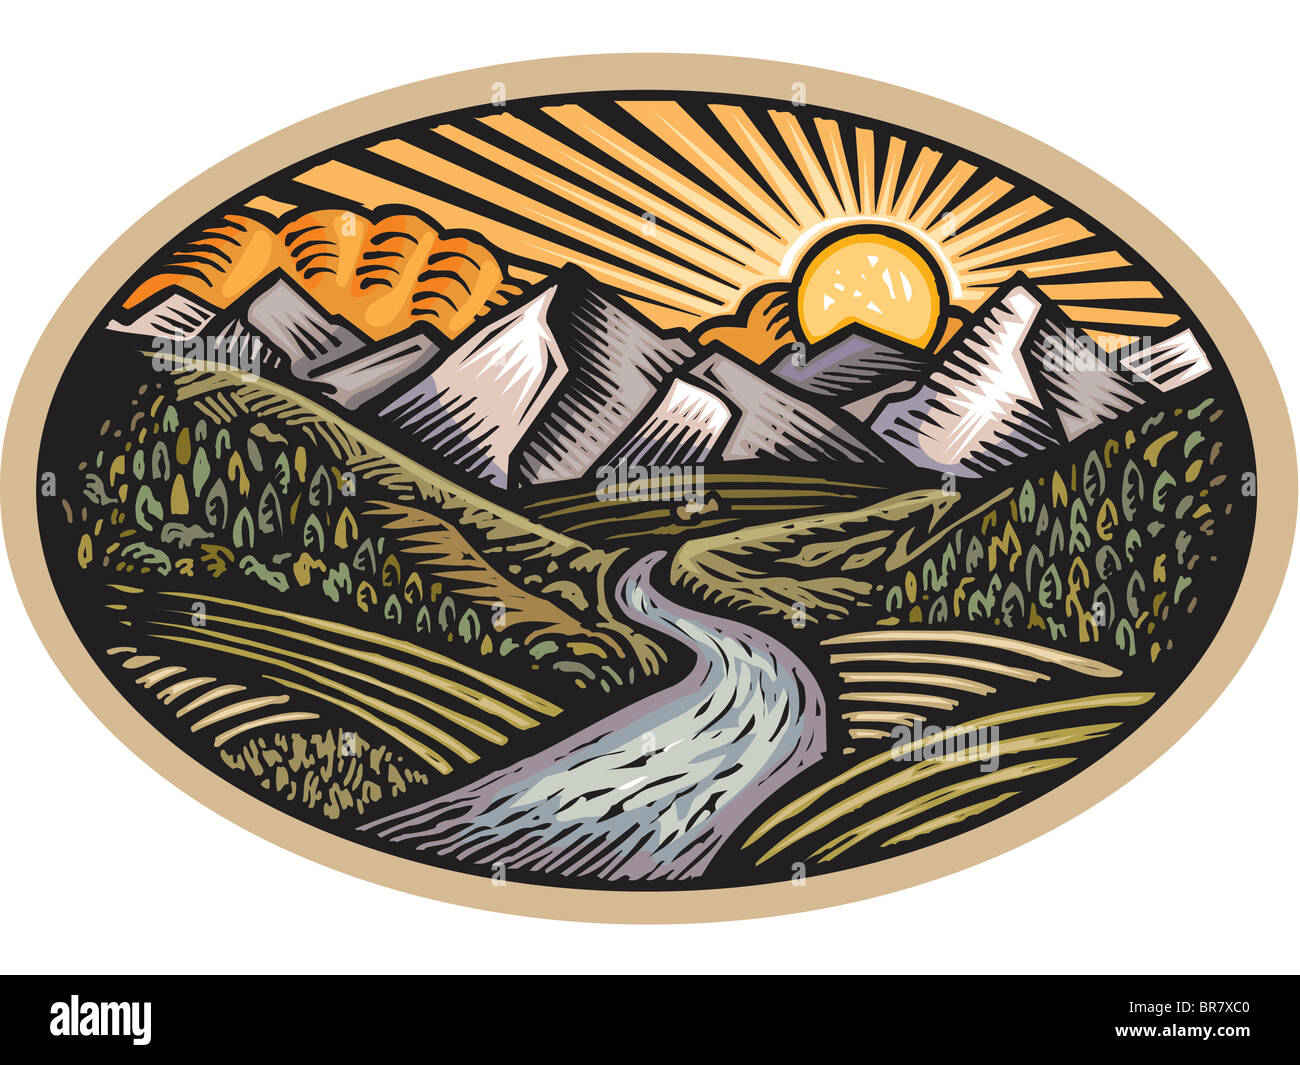 Oval shaped nature scene of mountains, hills and stream Stock Photo